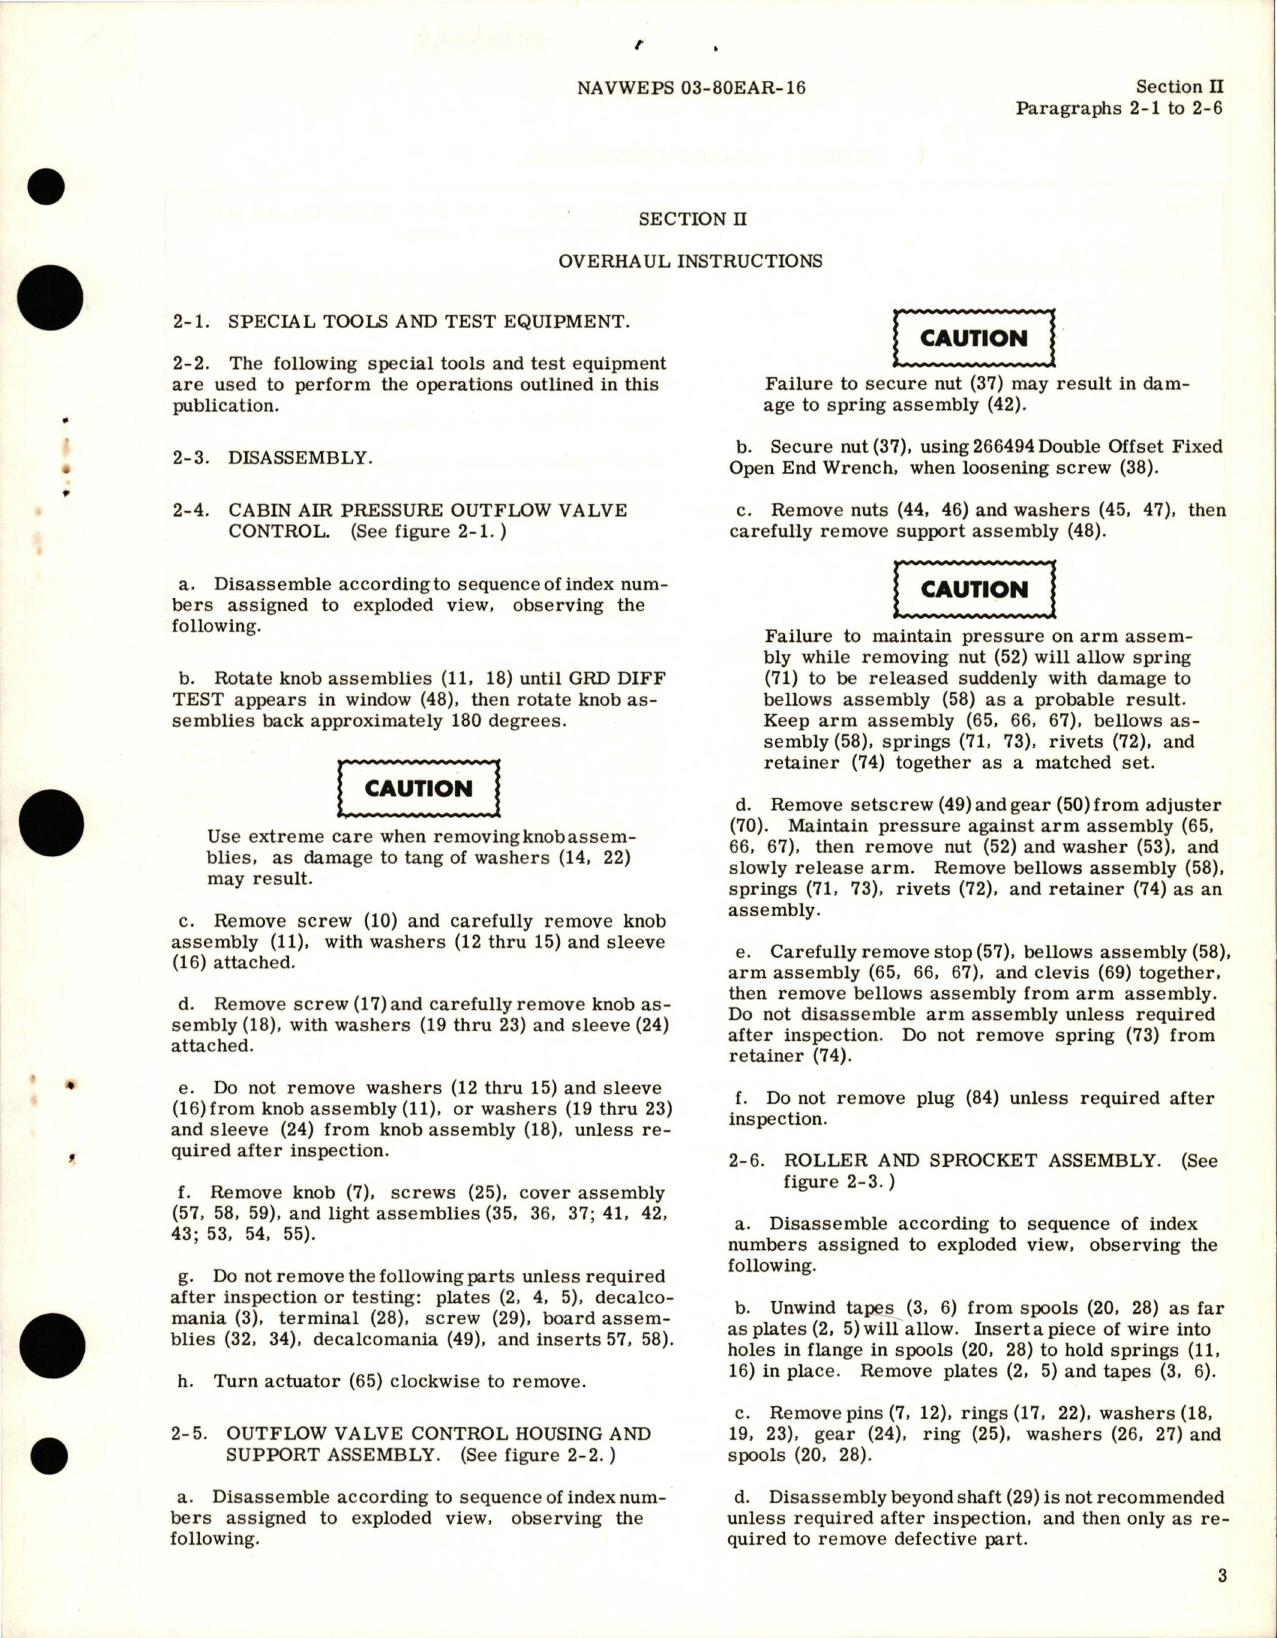 Sample page 5 from AirCorps Library document: Overhaul Instructions for Cabin Air Pressure Outflow Valve Control - Part 102210-9